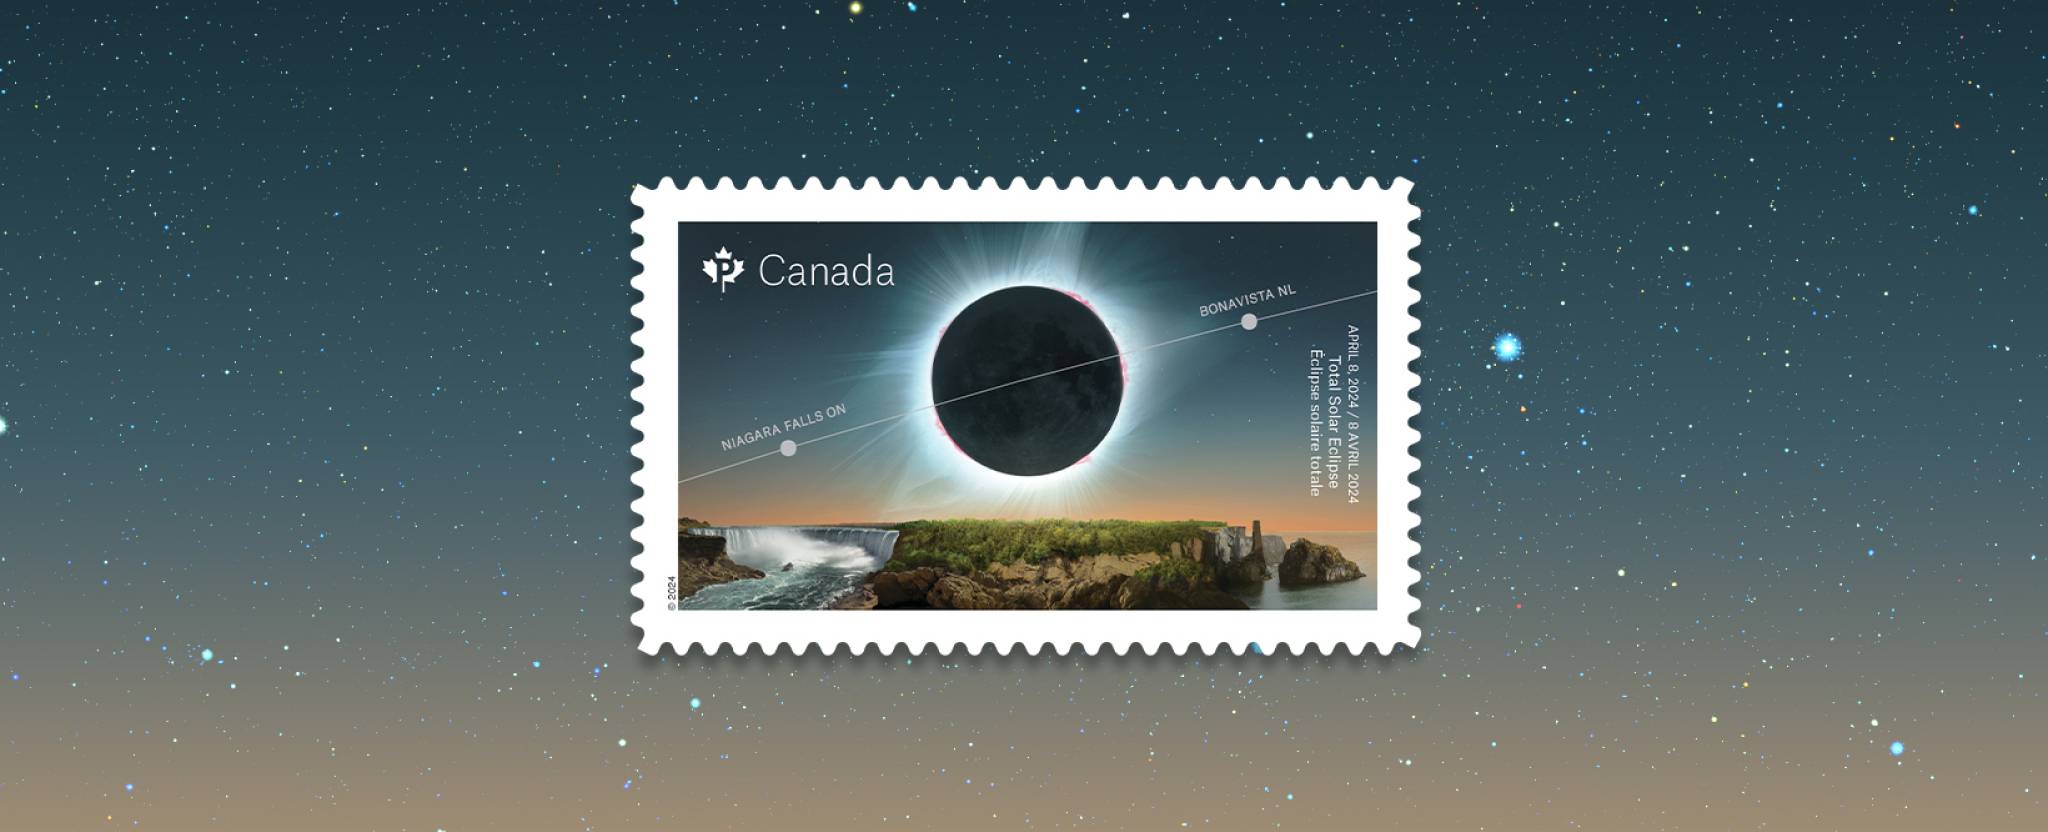 Stamp depicting the sun at the moment of totality during a total solar eclipse, set against a dark sky and coastal landscape imagery.